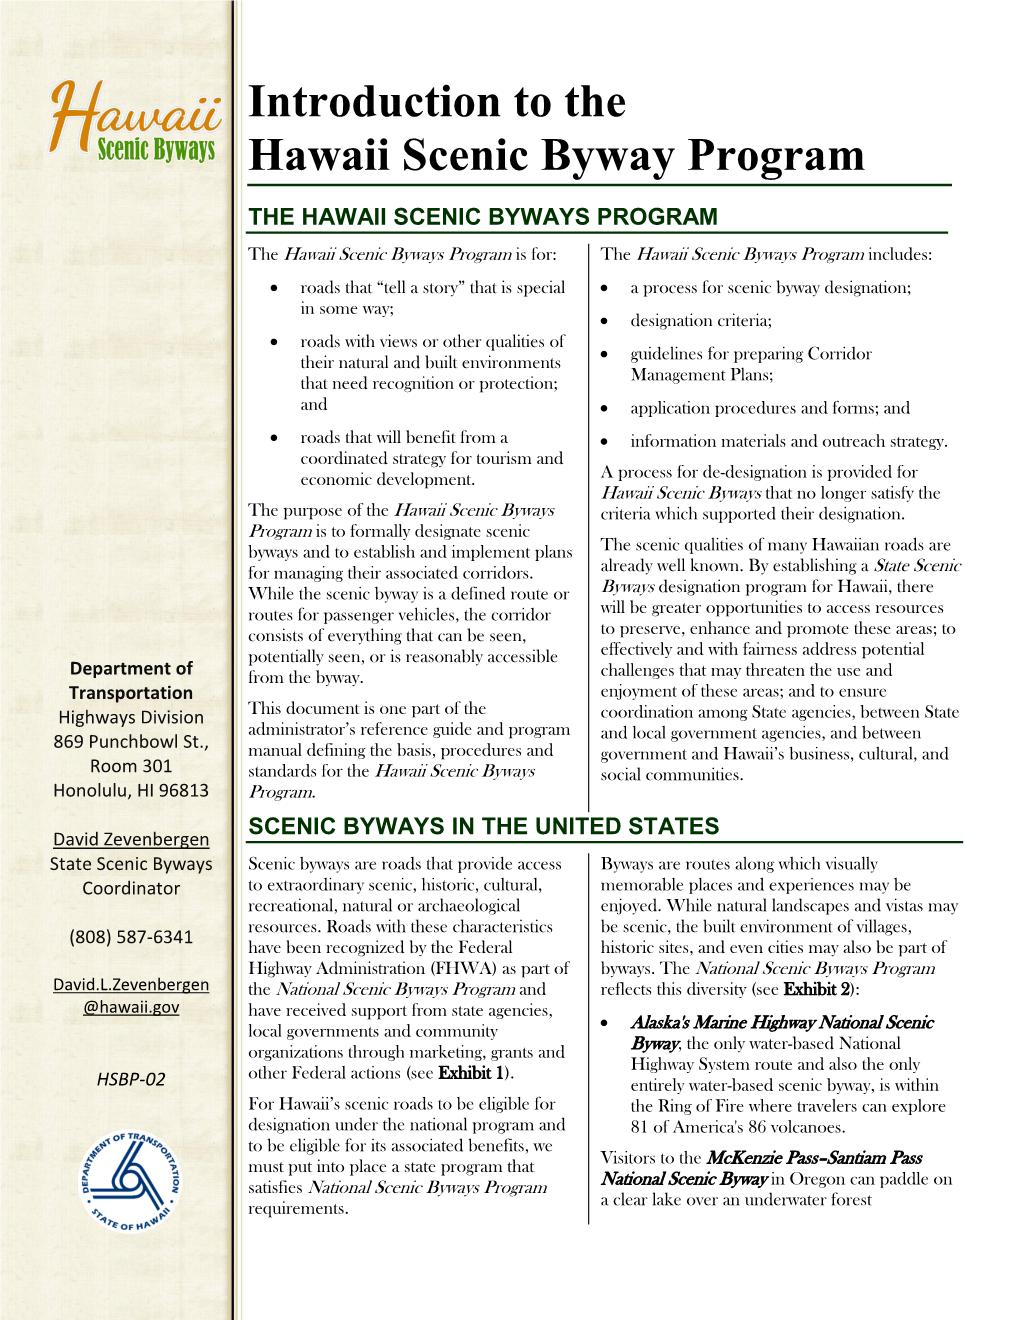 HSBP‐02, “Introduction to the Hawaii Scenic Byways Program”